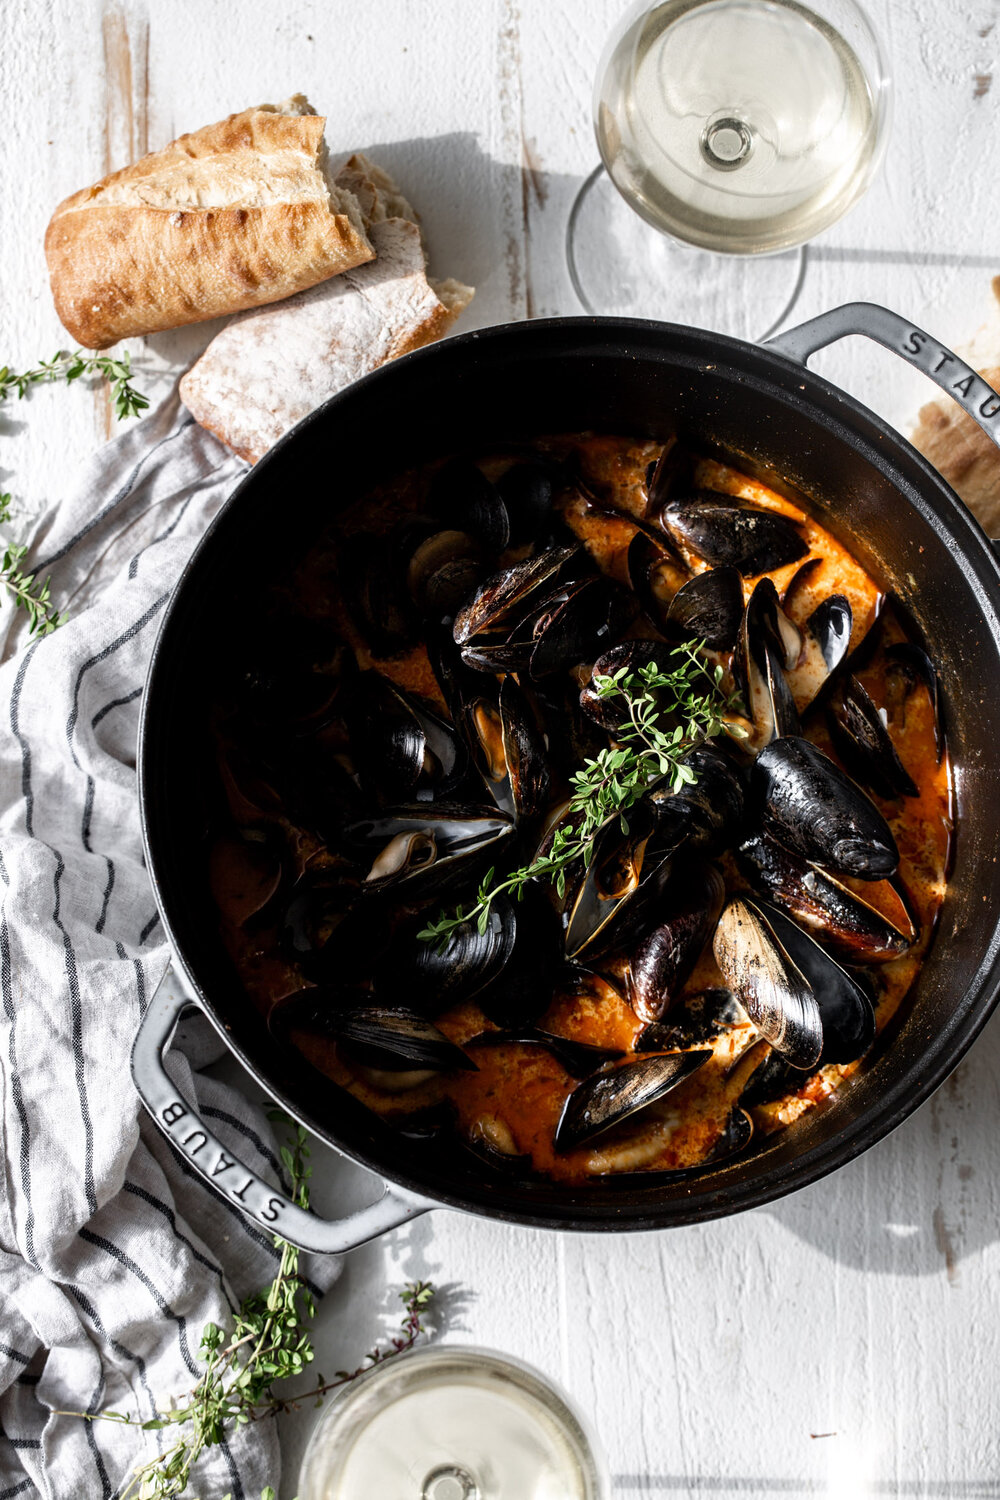 Steamed Mussels in Saffron Chorizo Broth topeed with thyme with bread